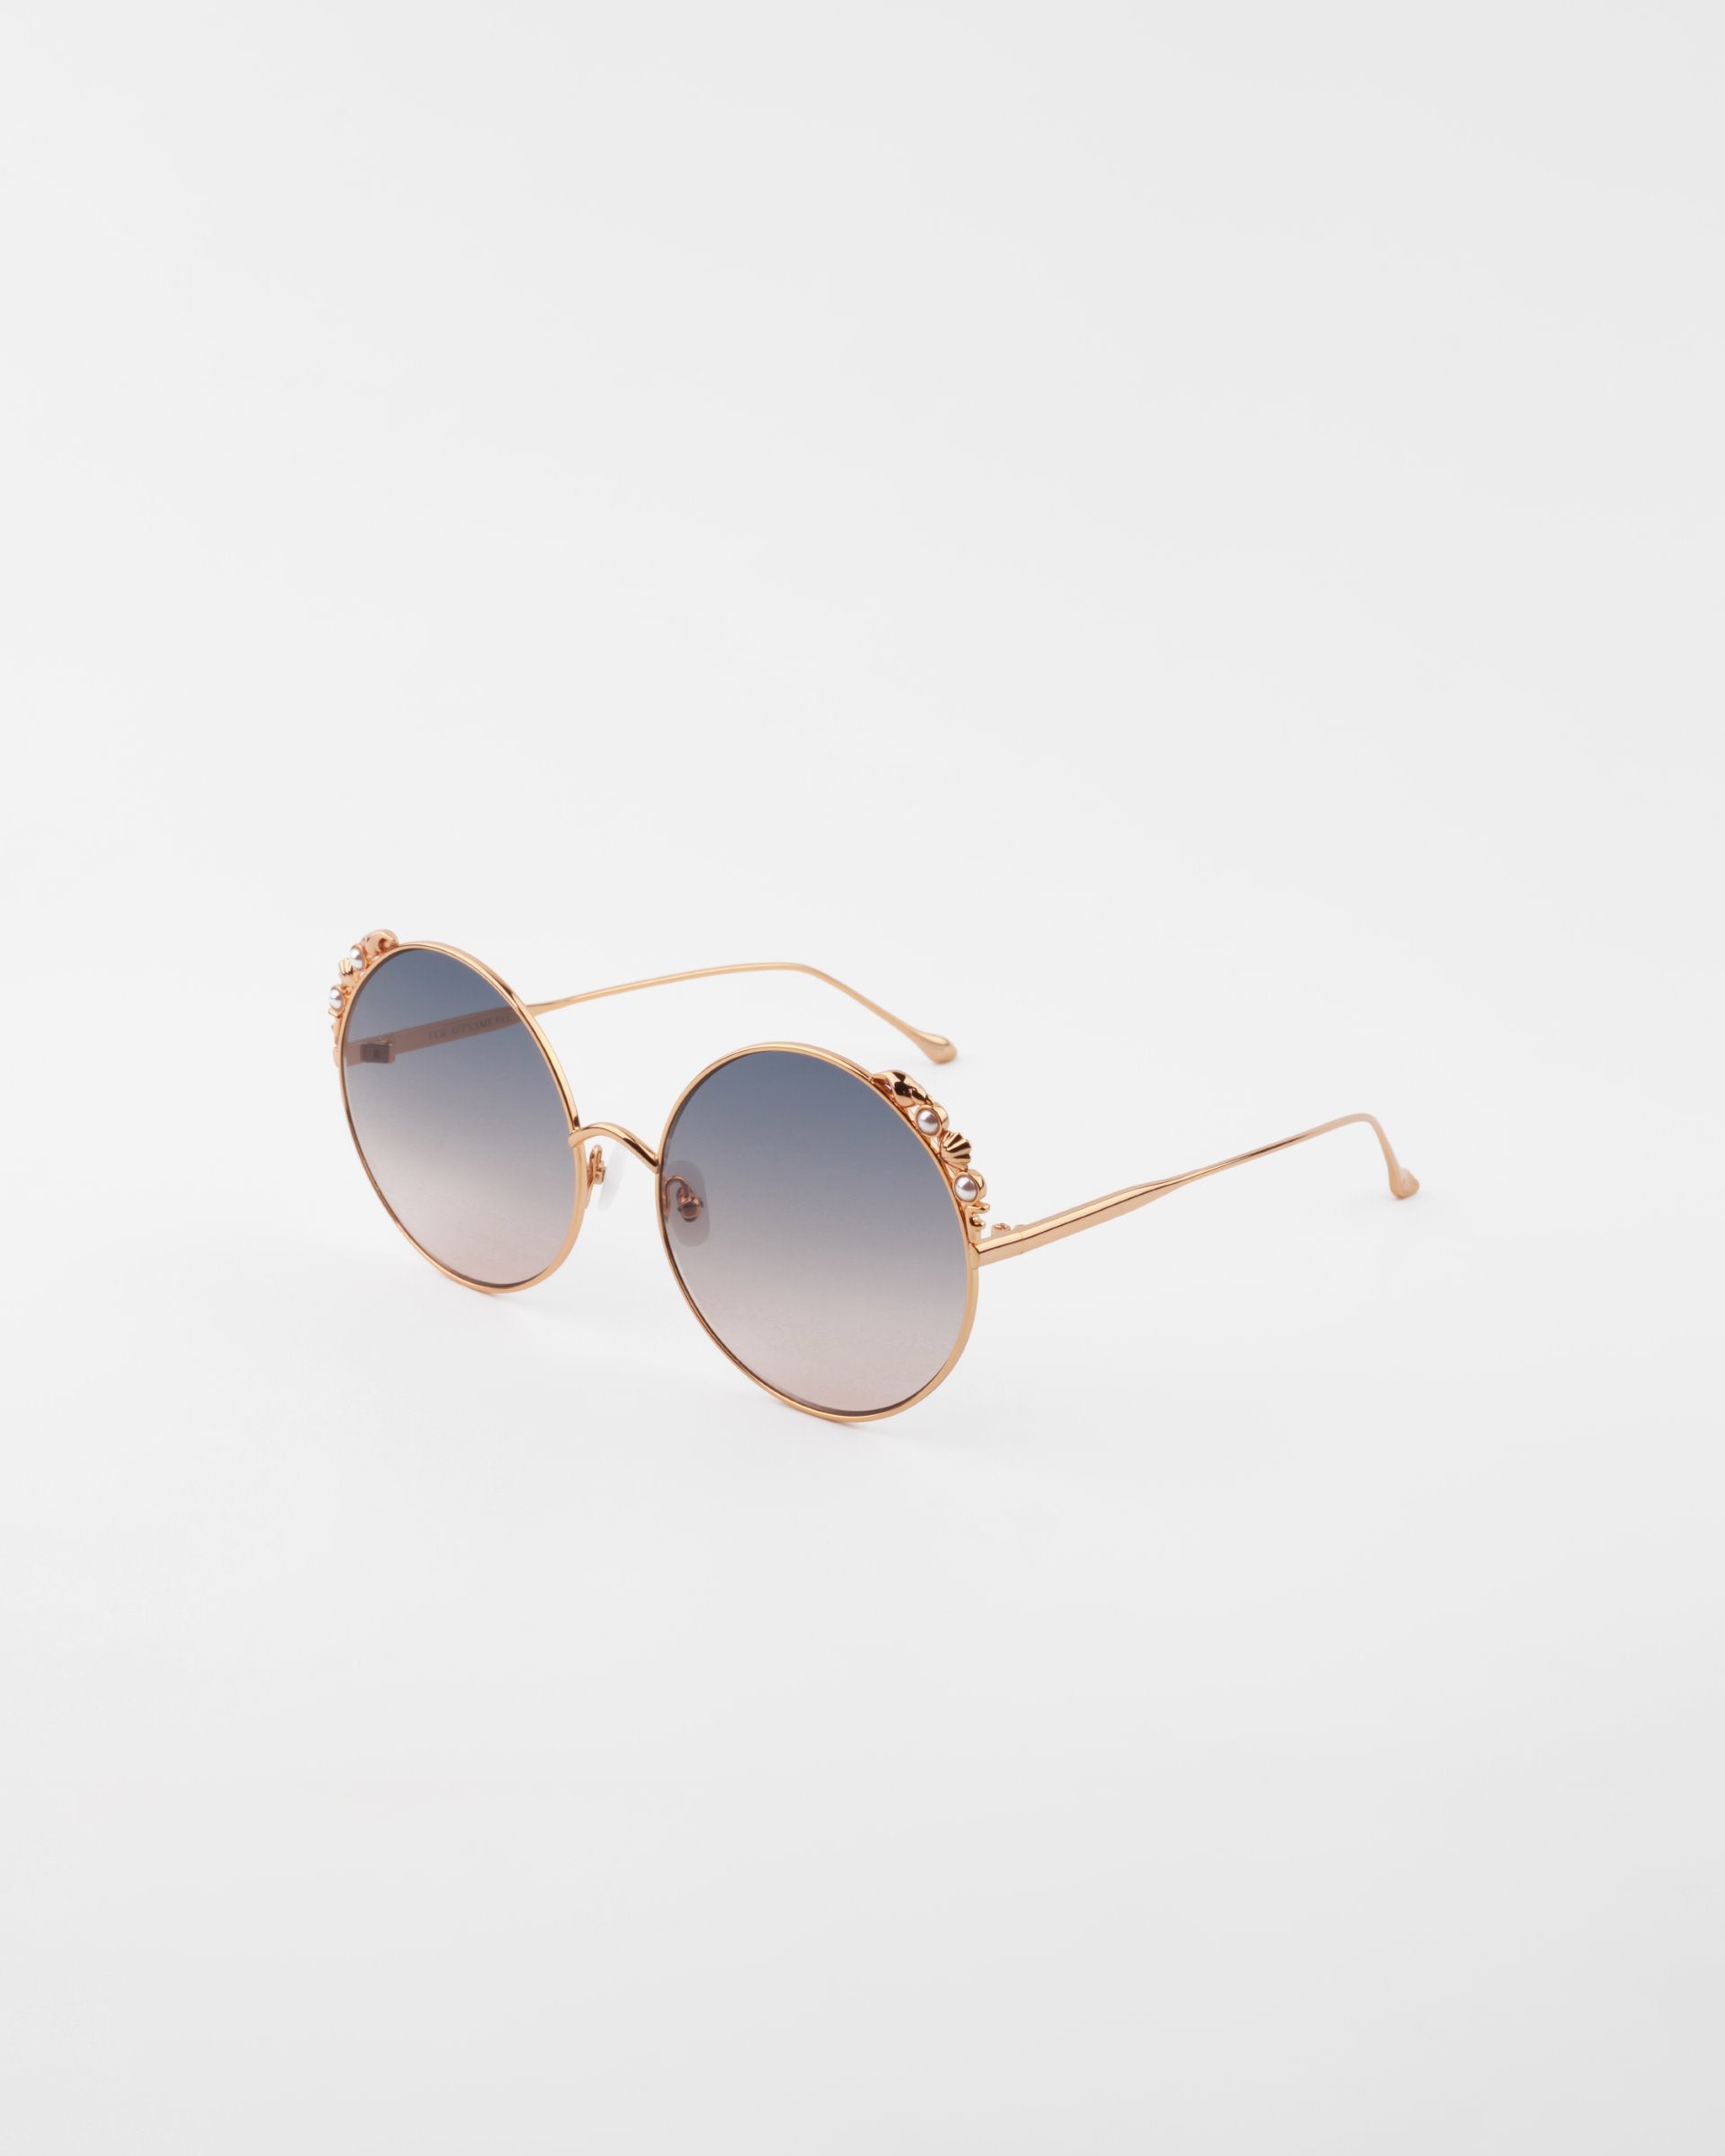 A pair of handmade gold-plated Lindy sunglasses by For Art&#39;s Sake® with round frames and blue gradient lenses are placed on a plain white background. The ultra-lightweight, shatter-resistant lenses offer 100% UVA &amp; UVB protection, while the frames feature a decorative floral design on the upper edges.